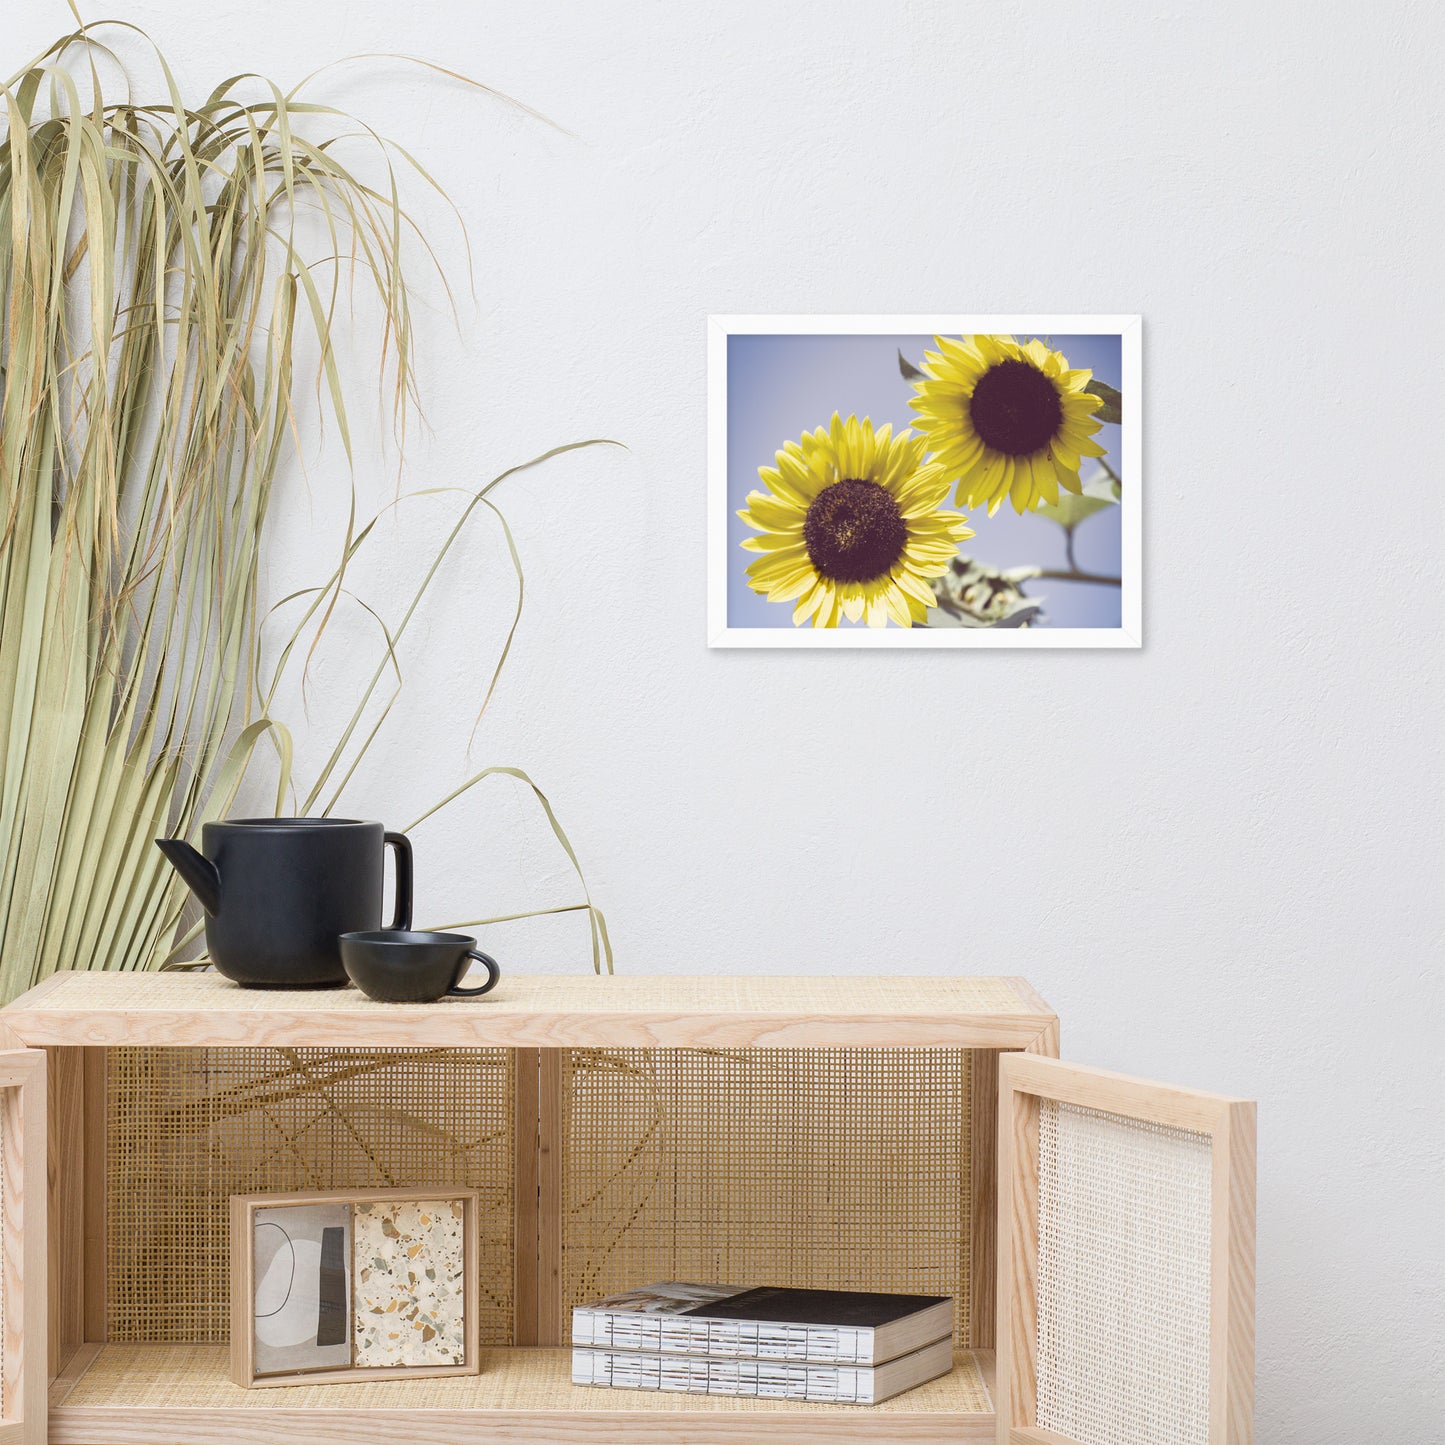 Vintage Floral Prints Framed: Aged Sunflowers Against Sky Abstract / Minimal / Rustic / Country / Farmhouse Style / Floral / Botanical / Nature Photo Framed Wall Art Print - Artwork - Wall Decor - Home Decor